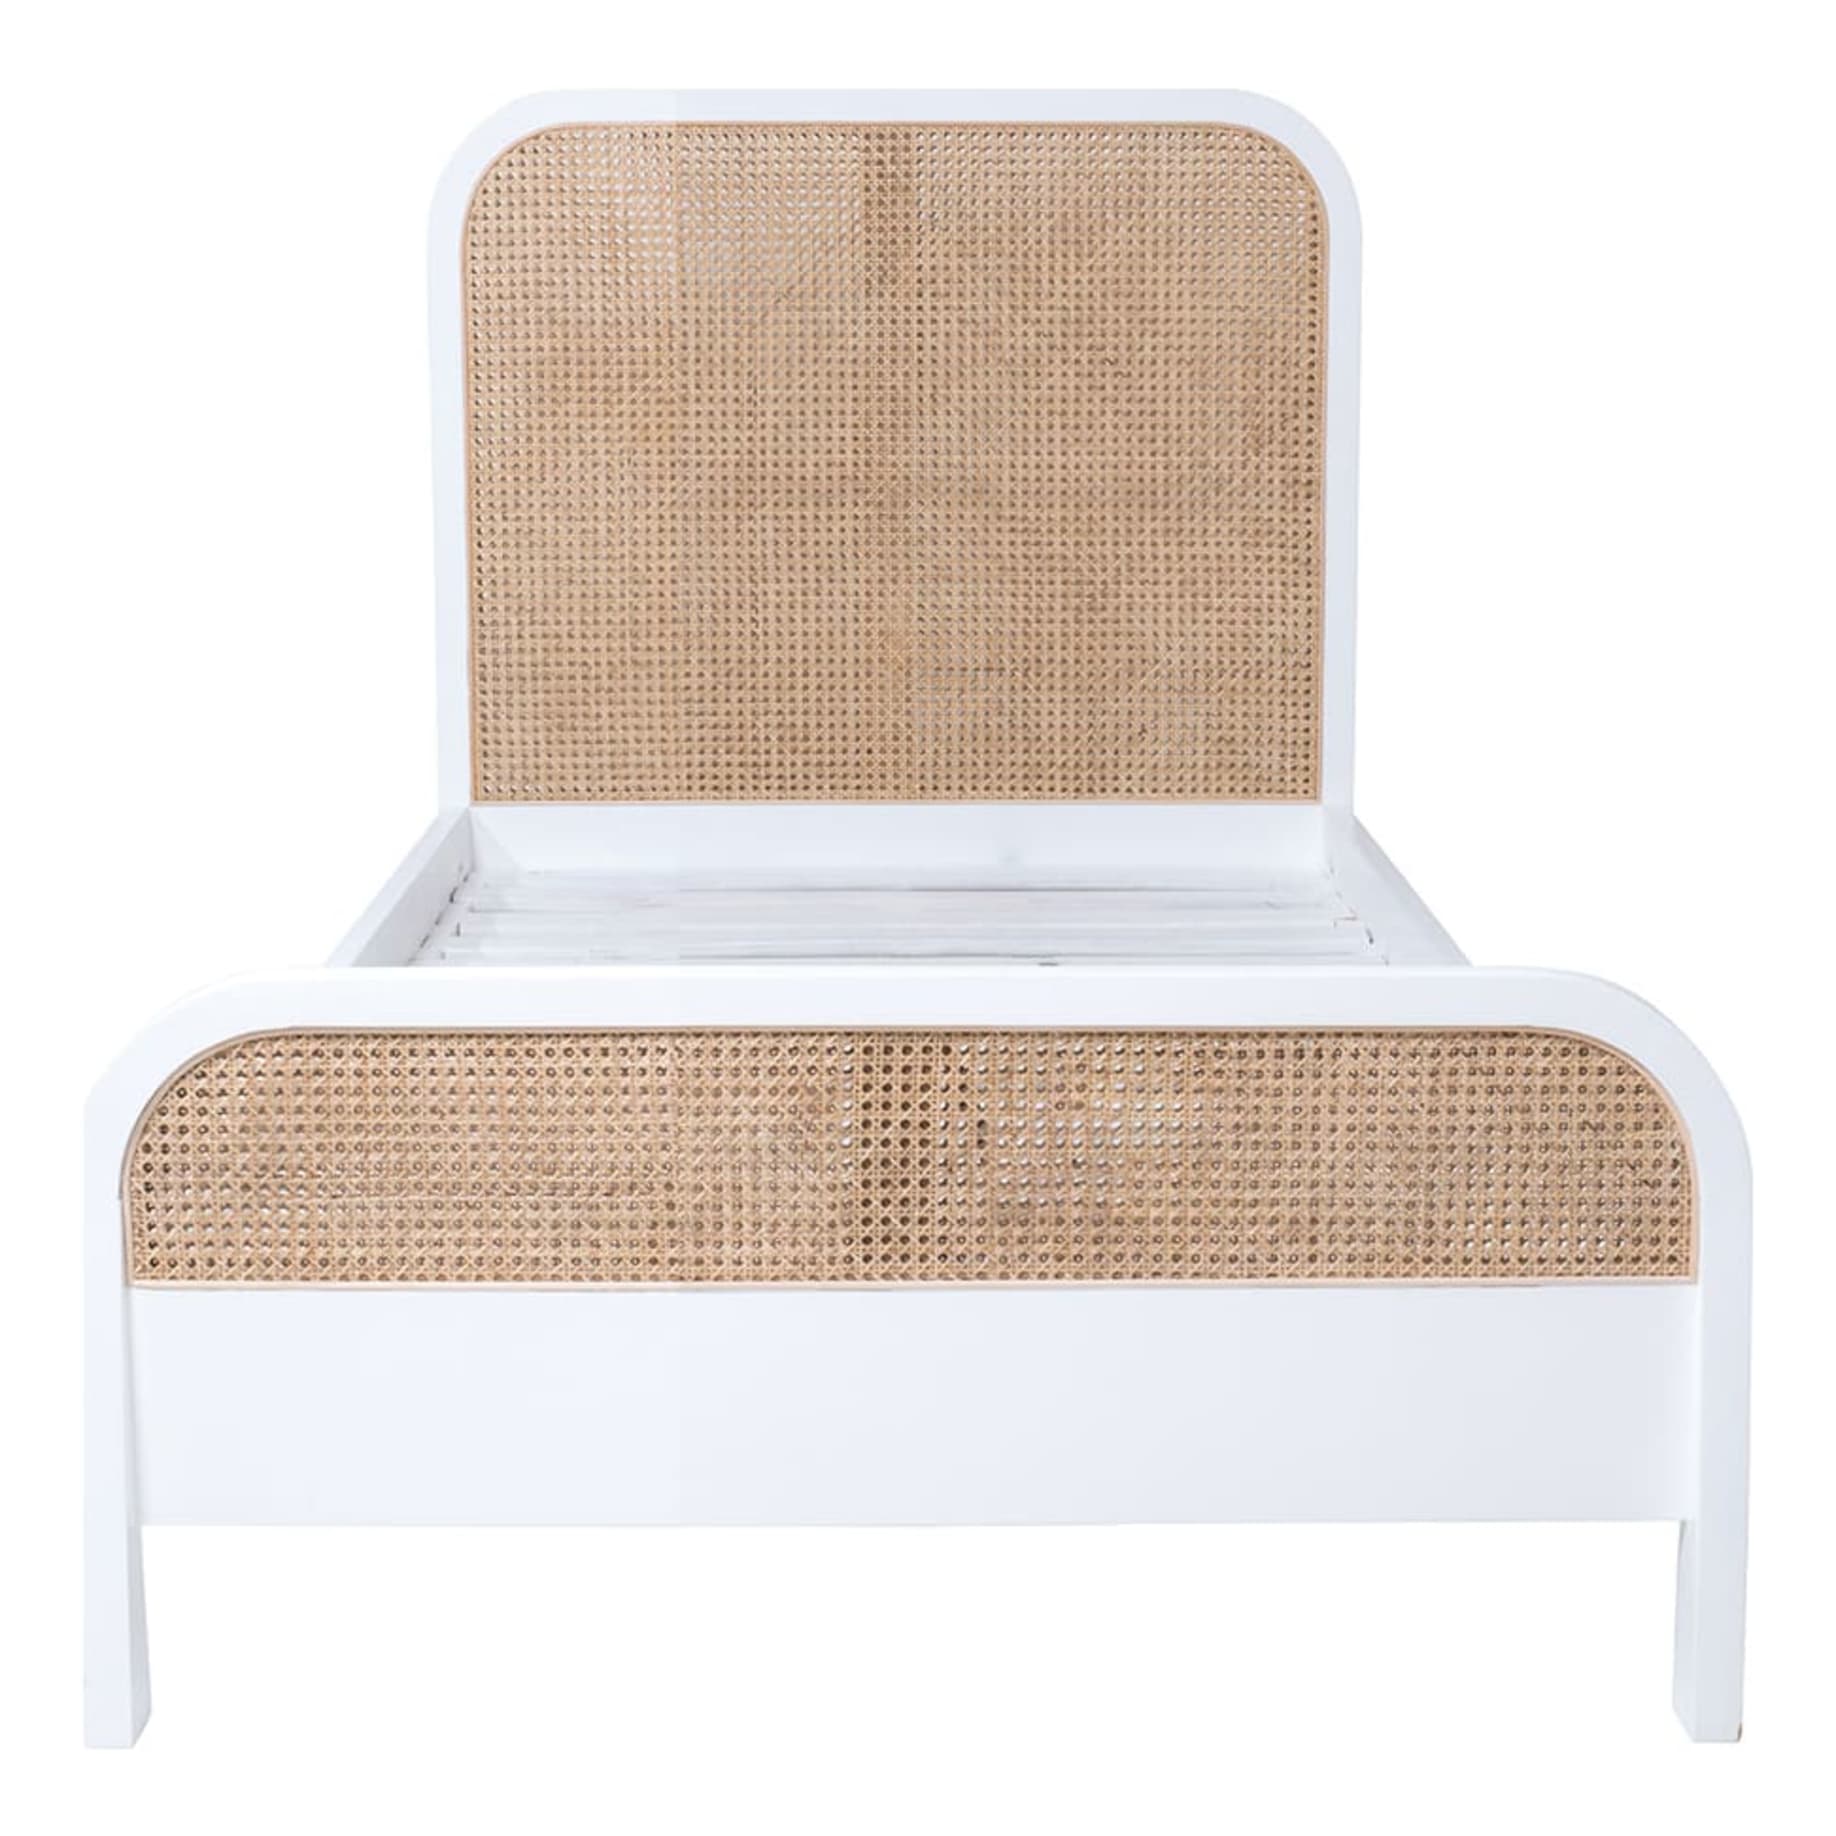 Willow Single Bed in Mangowood White / Rattan